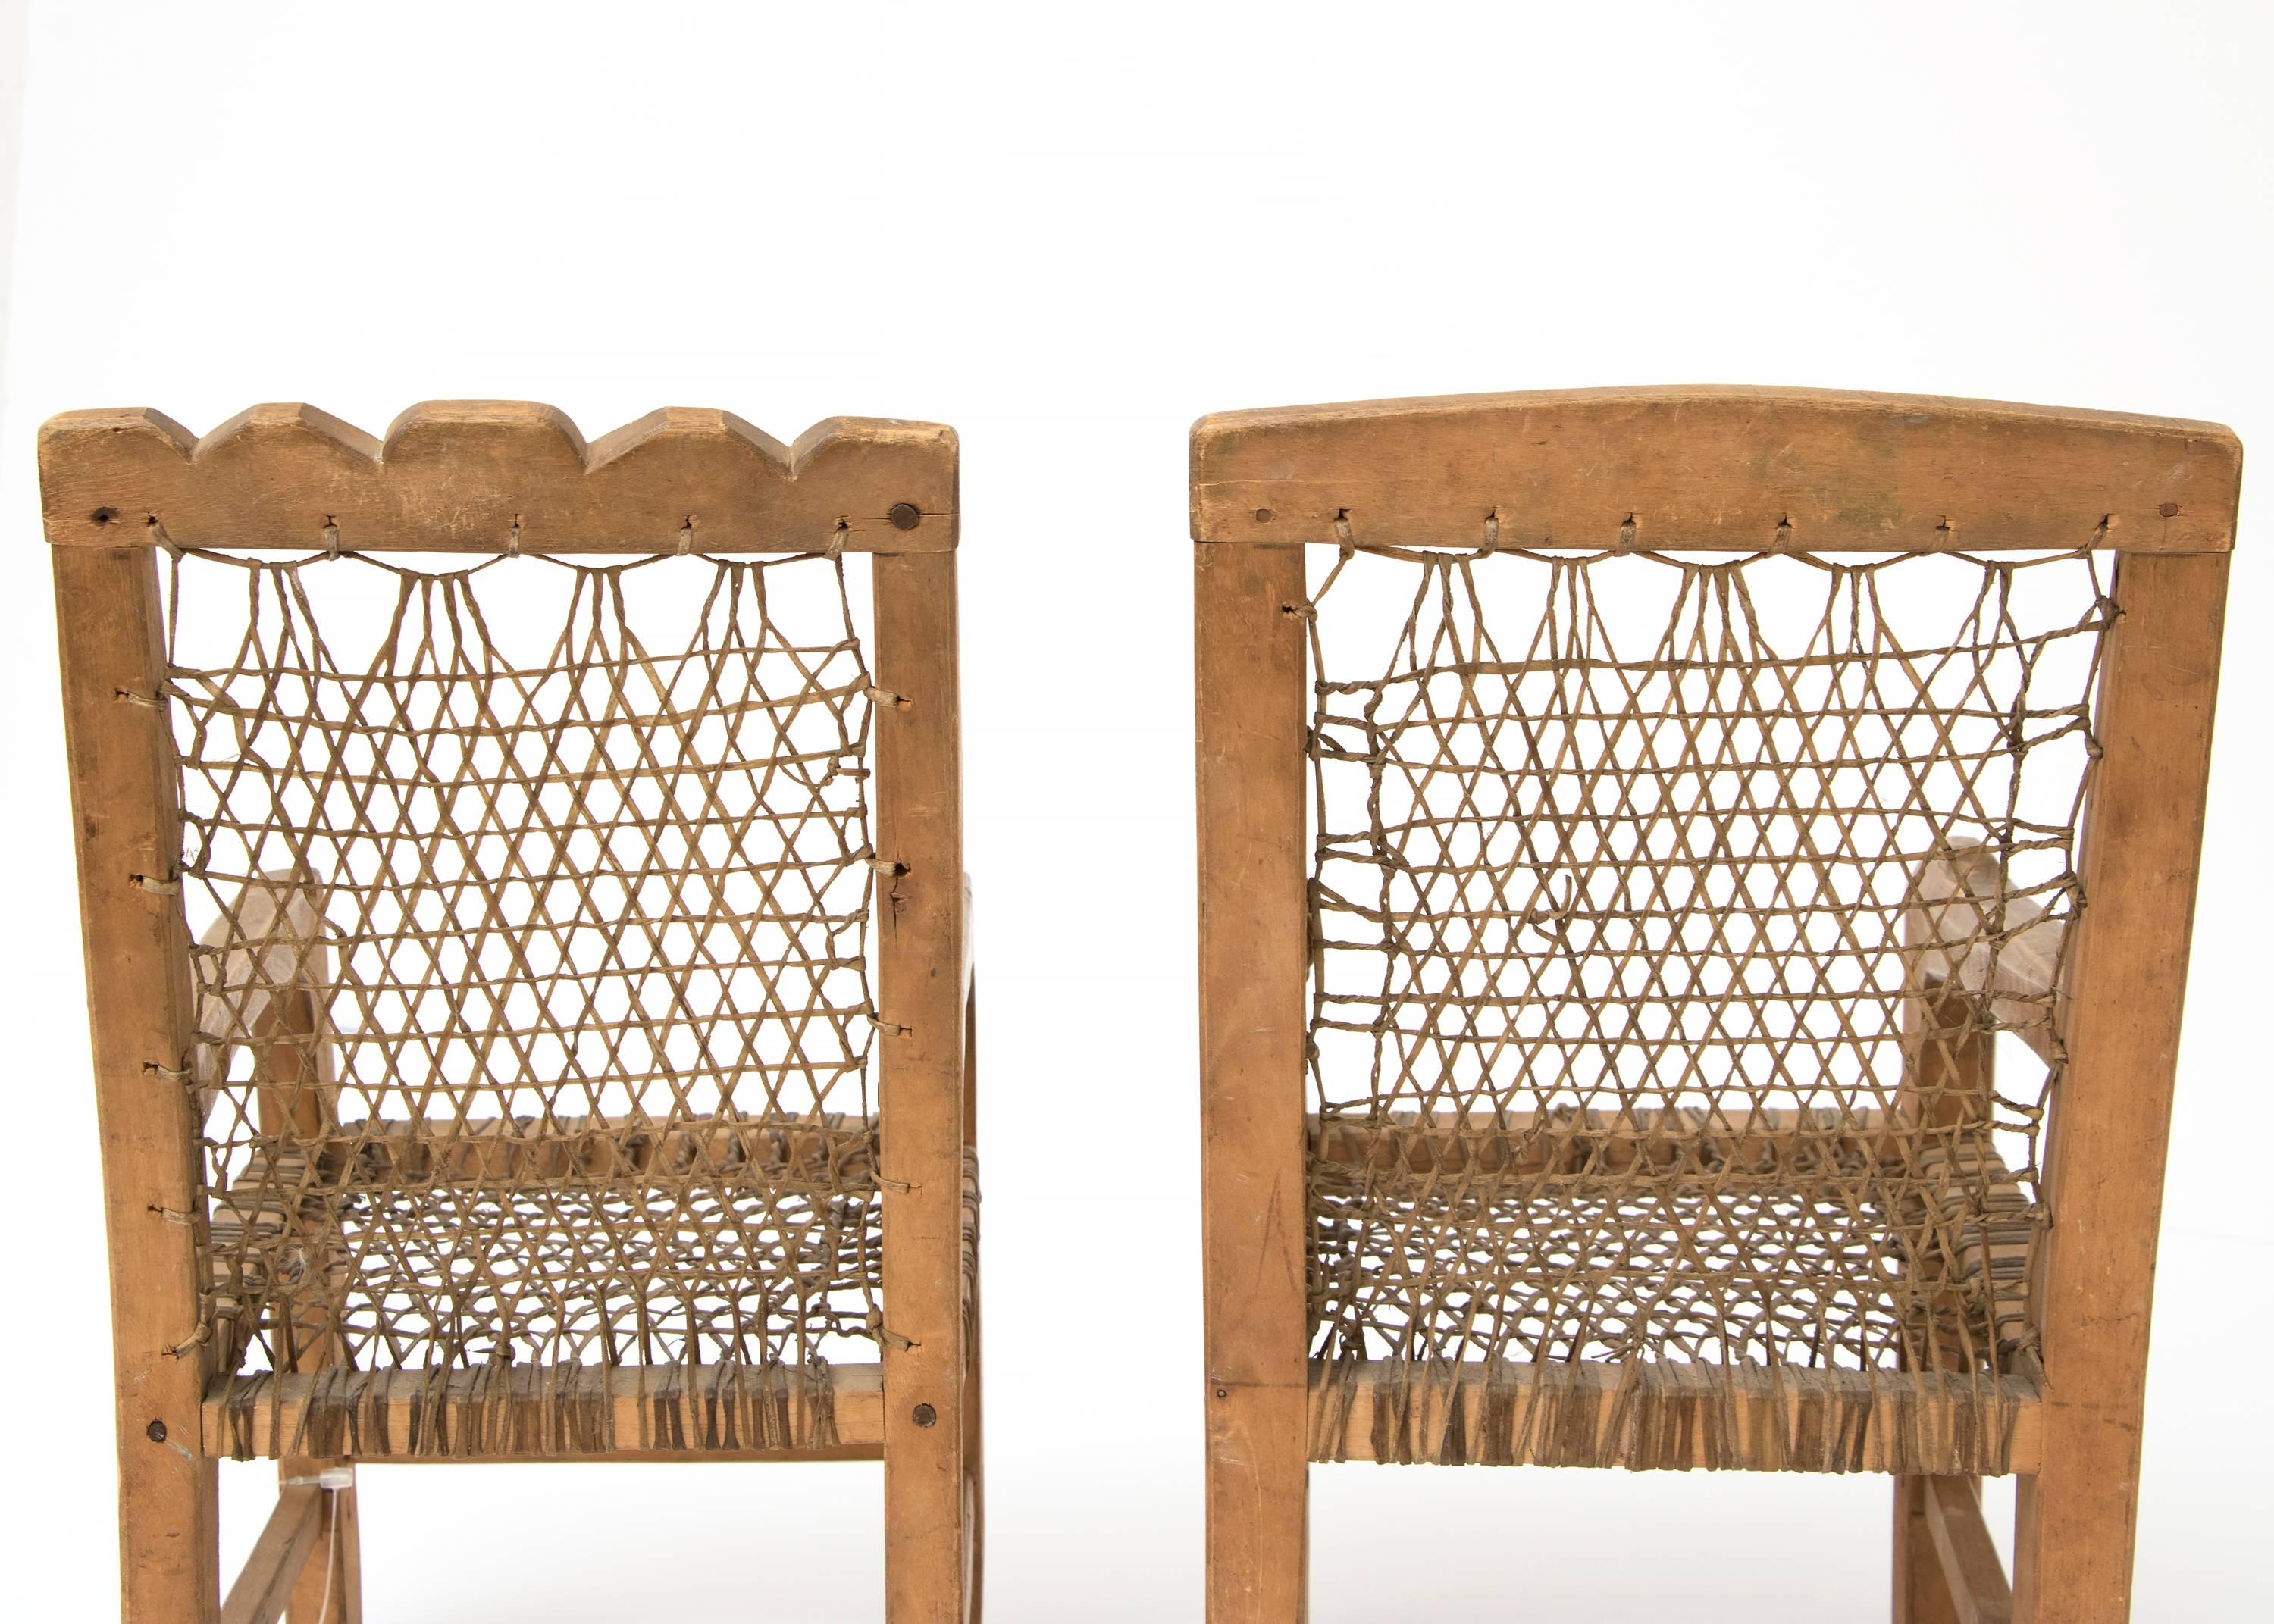 A rare pair of Northwest Coast miniature chairs, likely made for a North American Indian girl's dolls. The Northwest Coast culture area spans the coastal areas of Oregon, Washington, British Columbia and Southeast Alaska. Tribal groups include